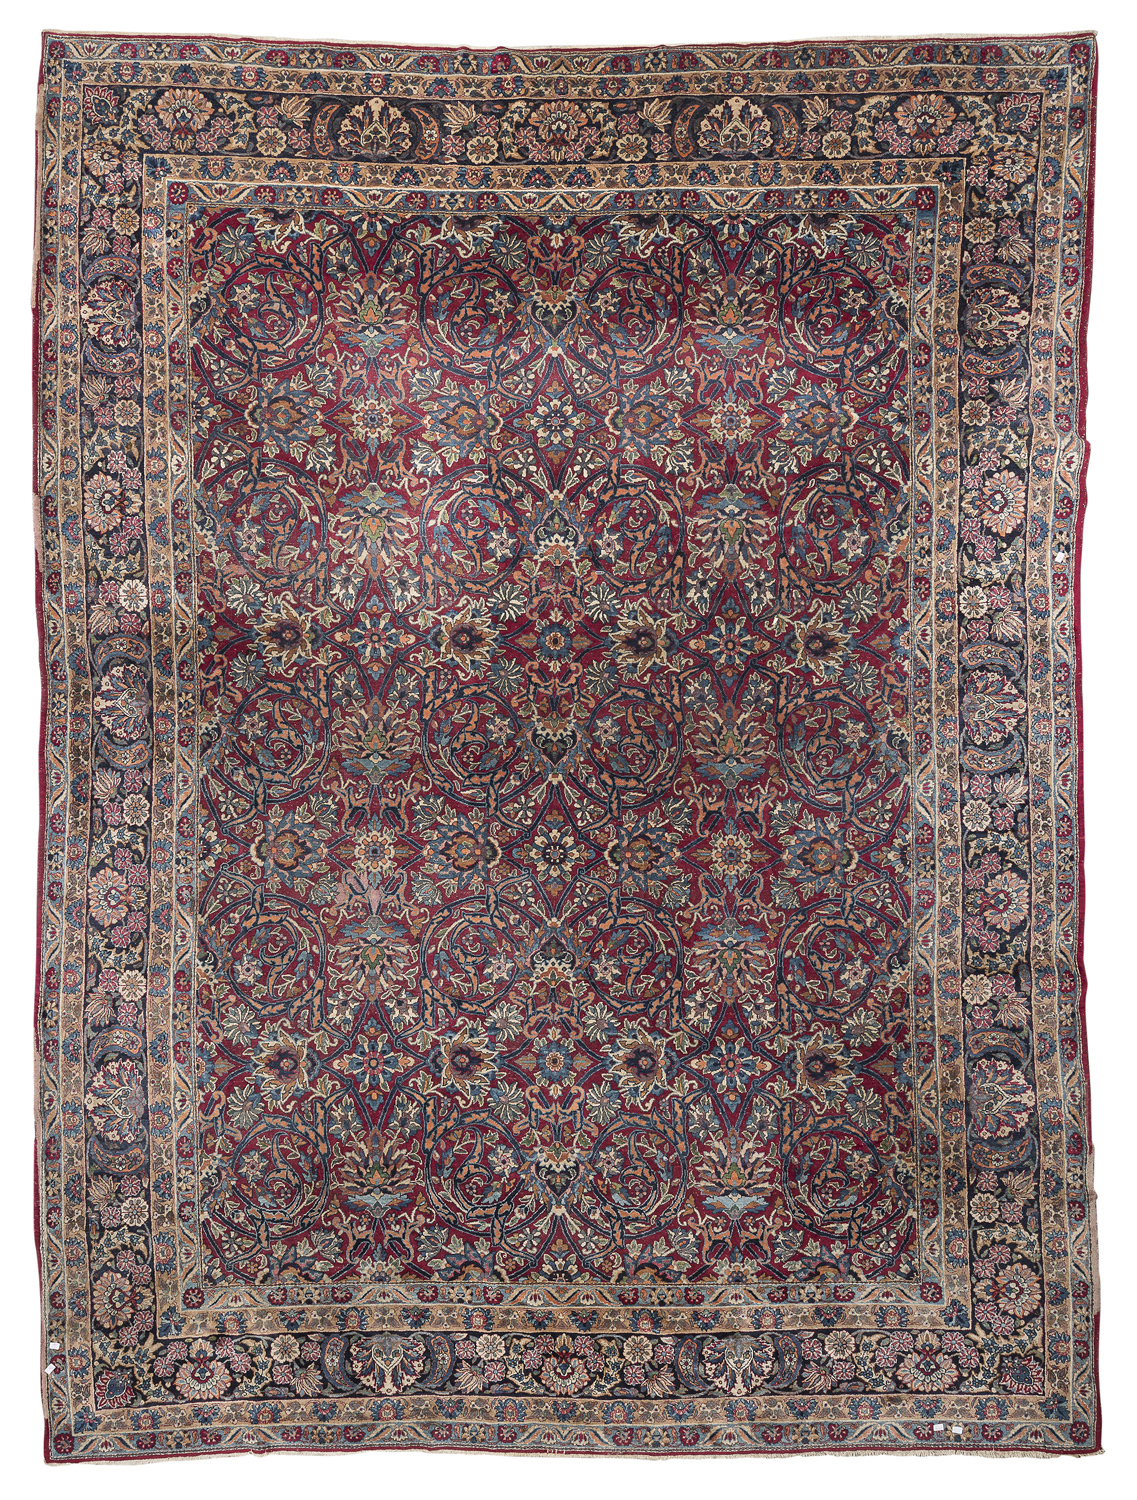 IMPERIAL KASHAN CARPET EARLY 20TH CENTURY